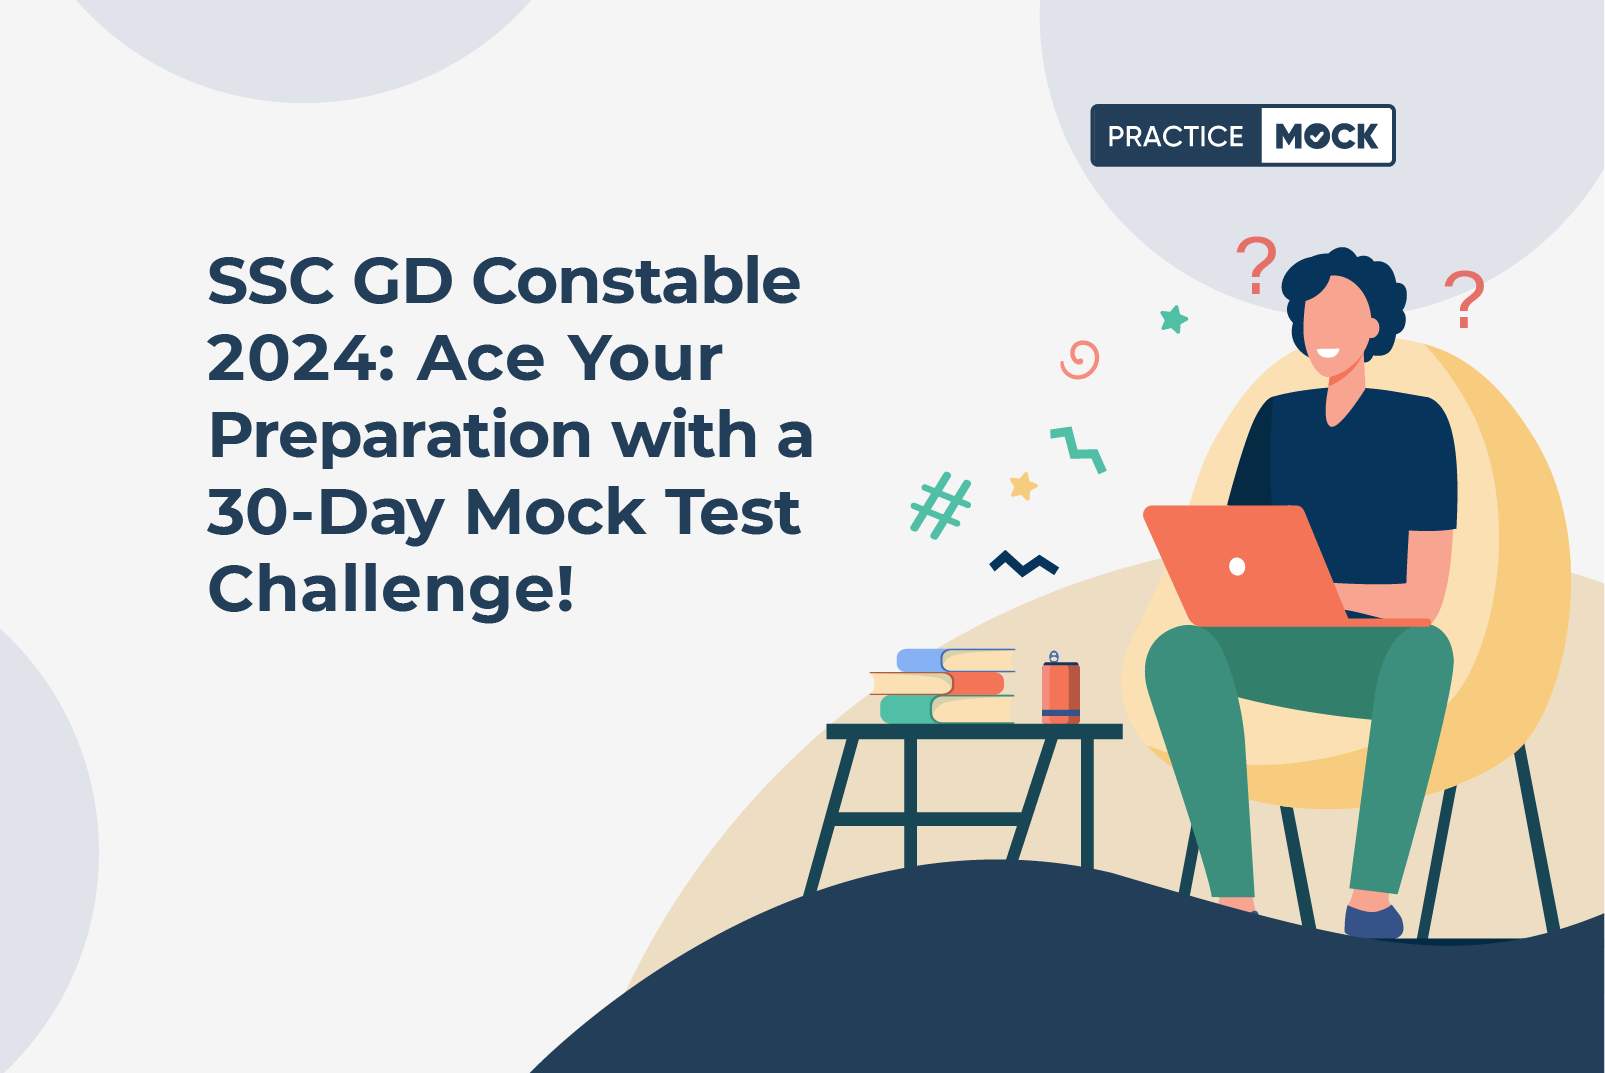 SSC GD Constable 2024: Ace Your Preparation with a 30-Day Mock Test Challenge!